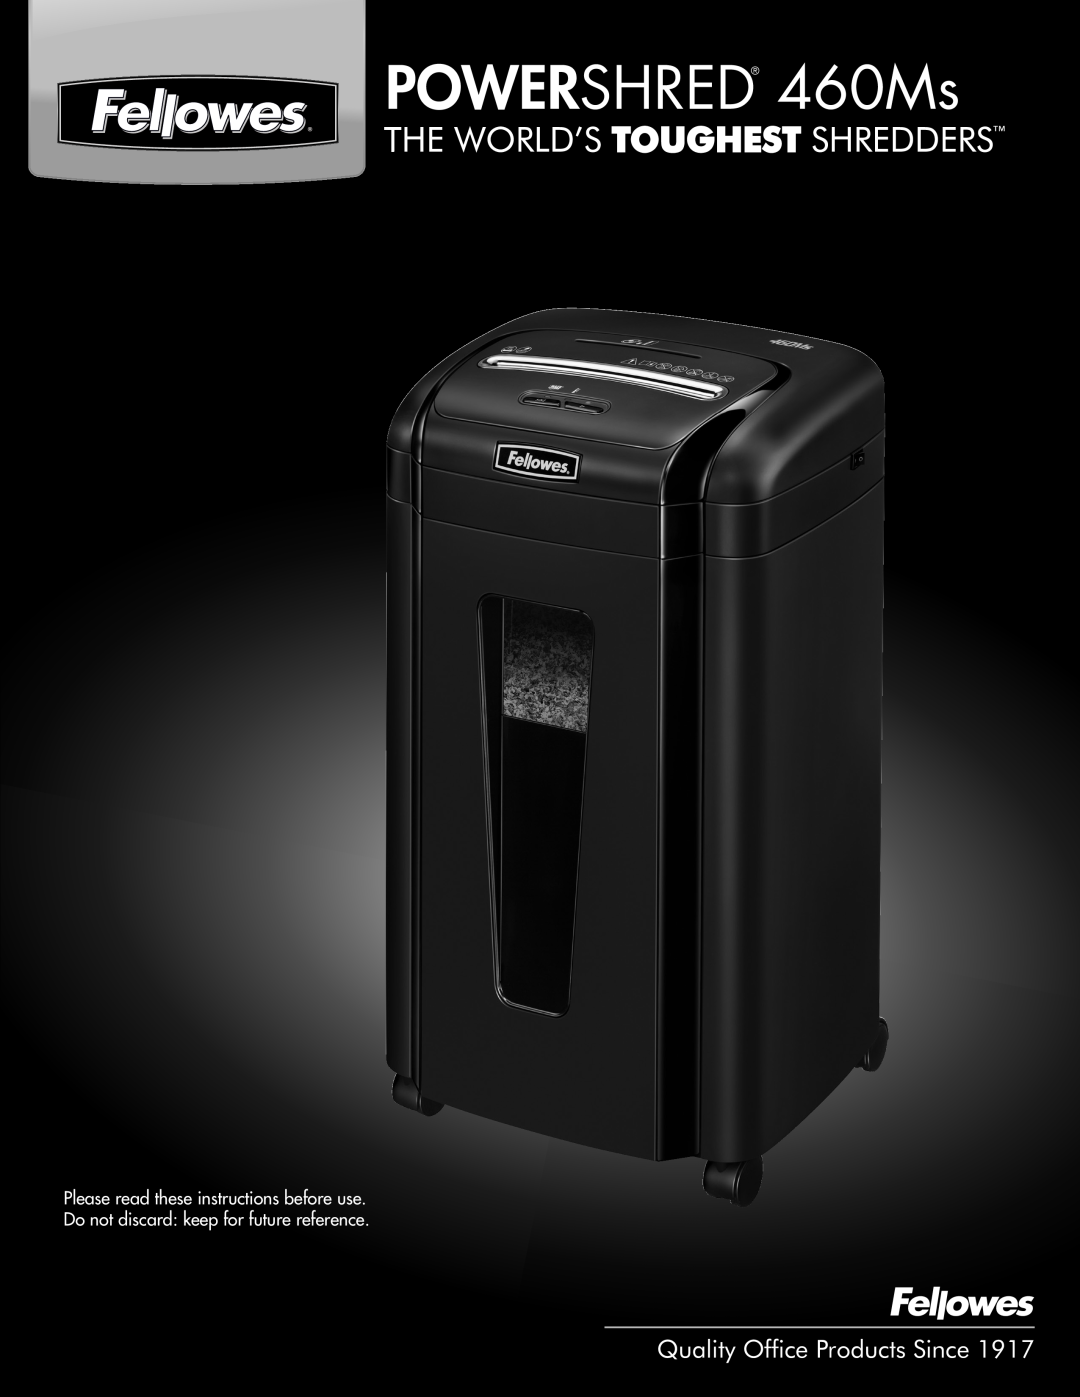 Fellowes manual POWERSHRED 460Ms, Quality Office Products Since 